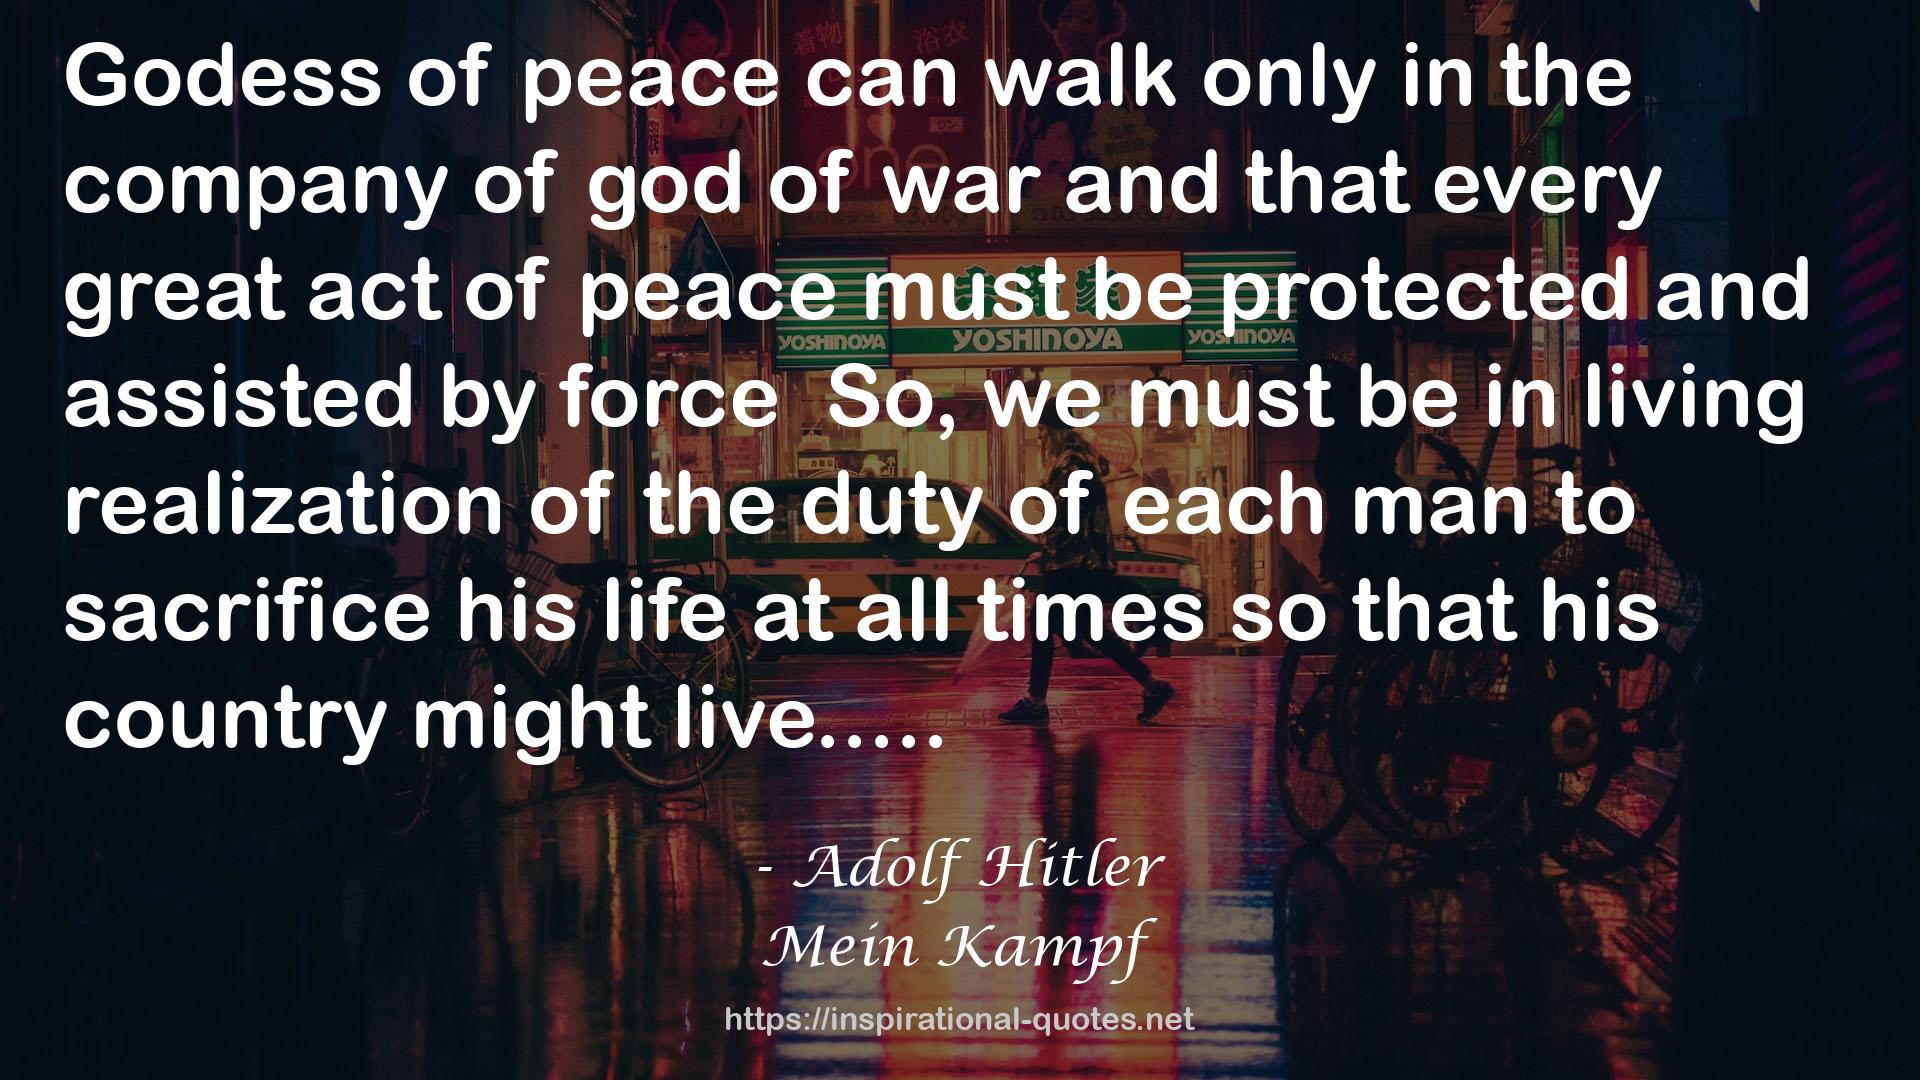 Mein Kampf QUOTES